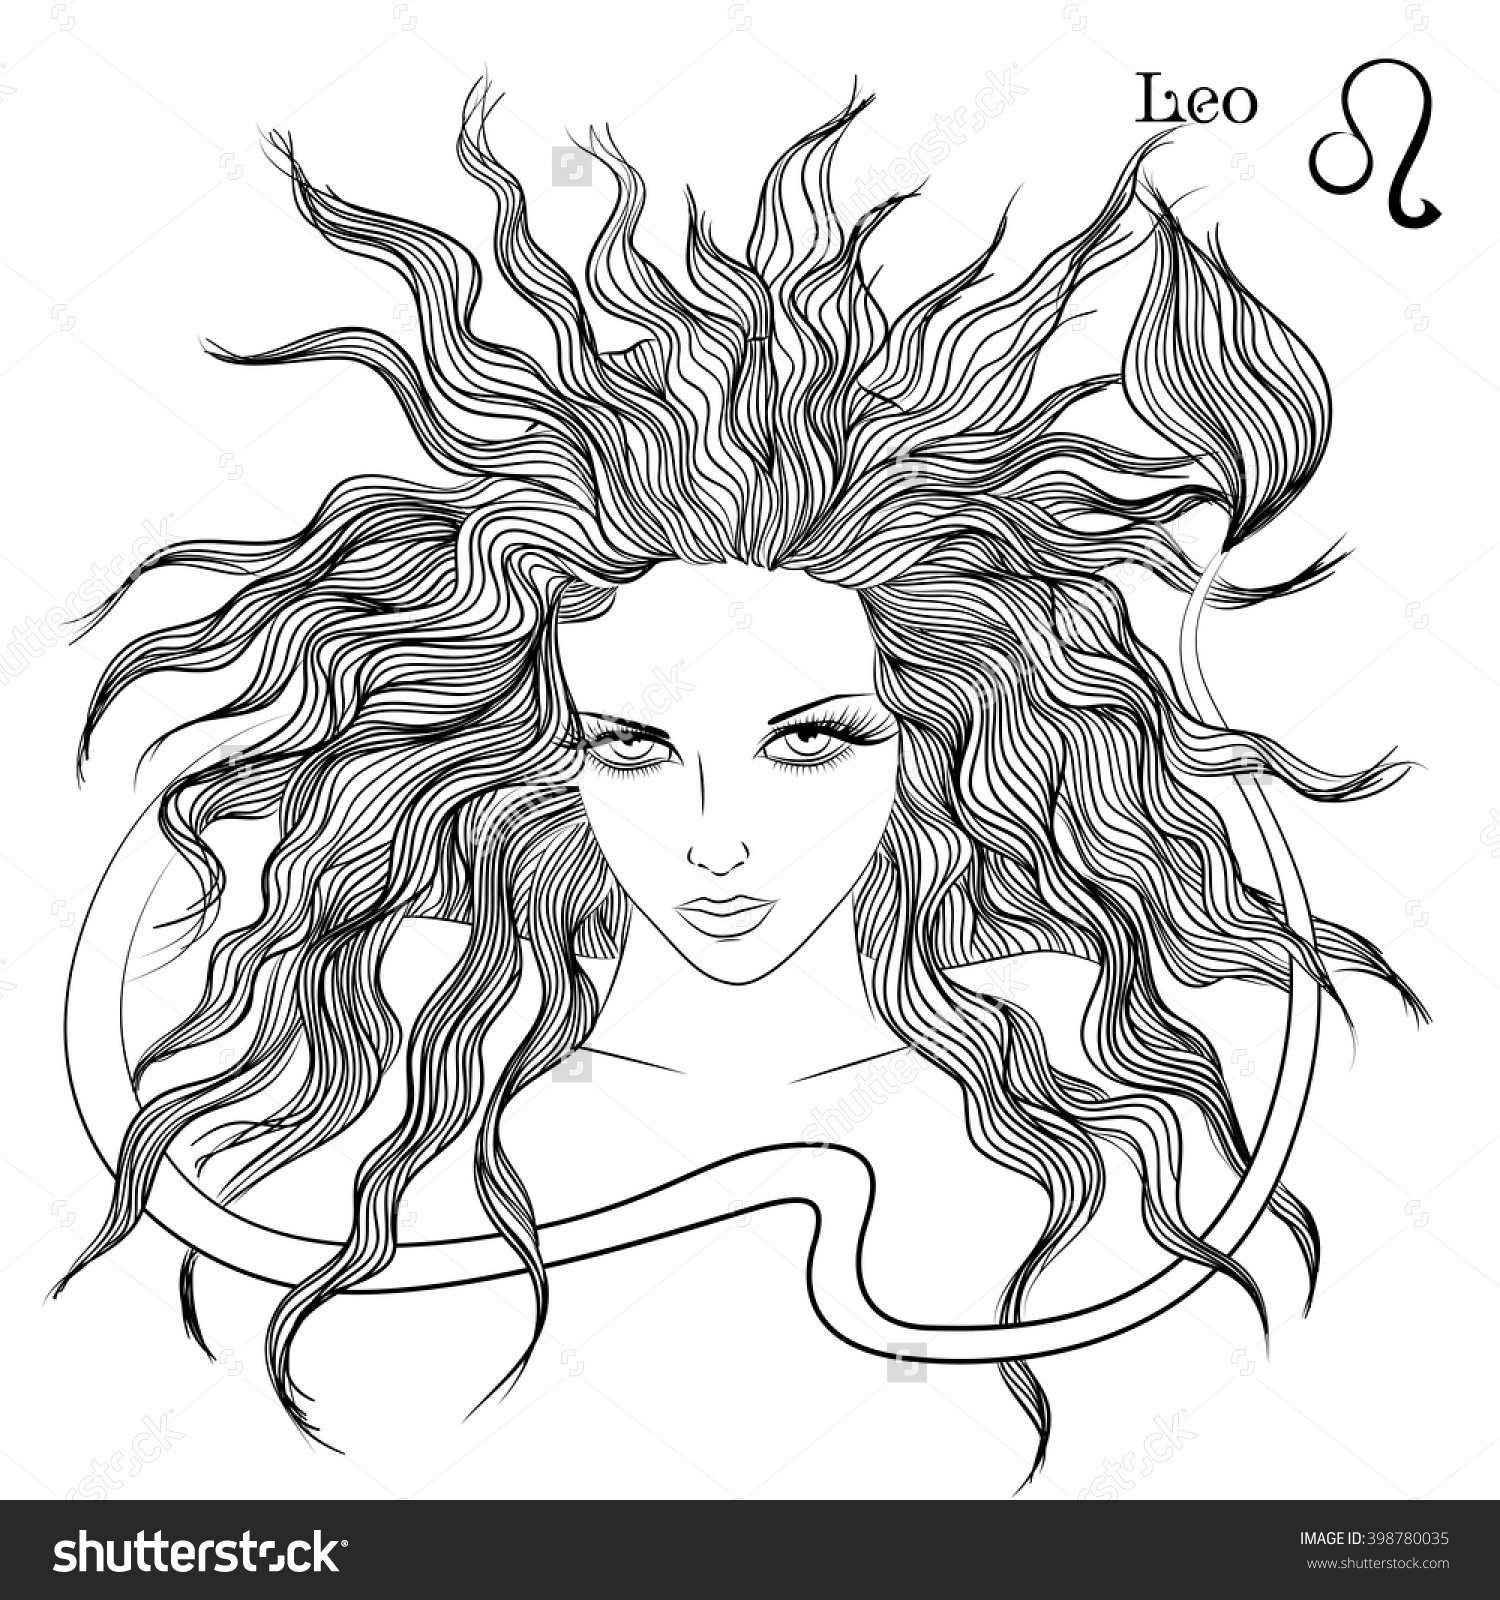 Leo (Astrology) coloring #9, Download drawings